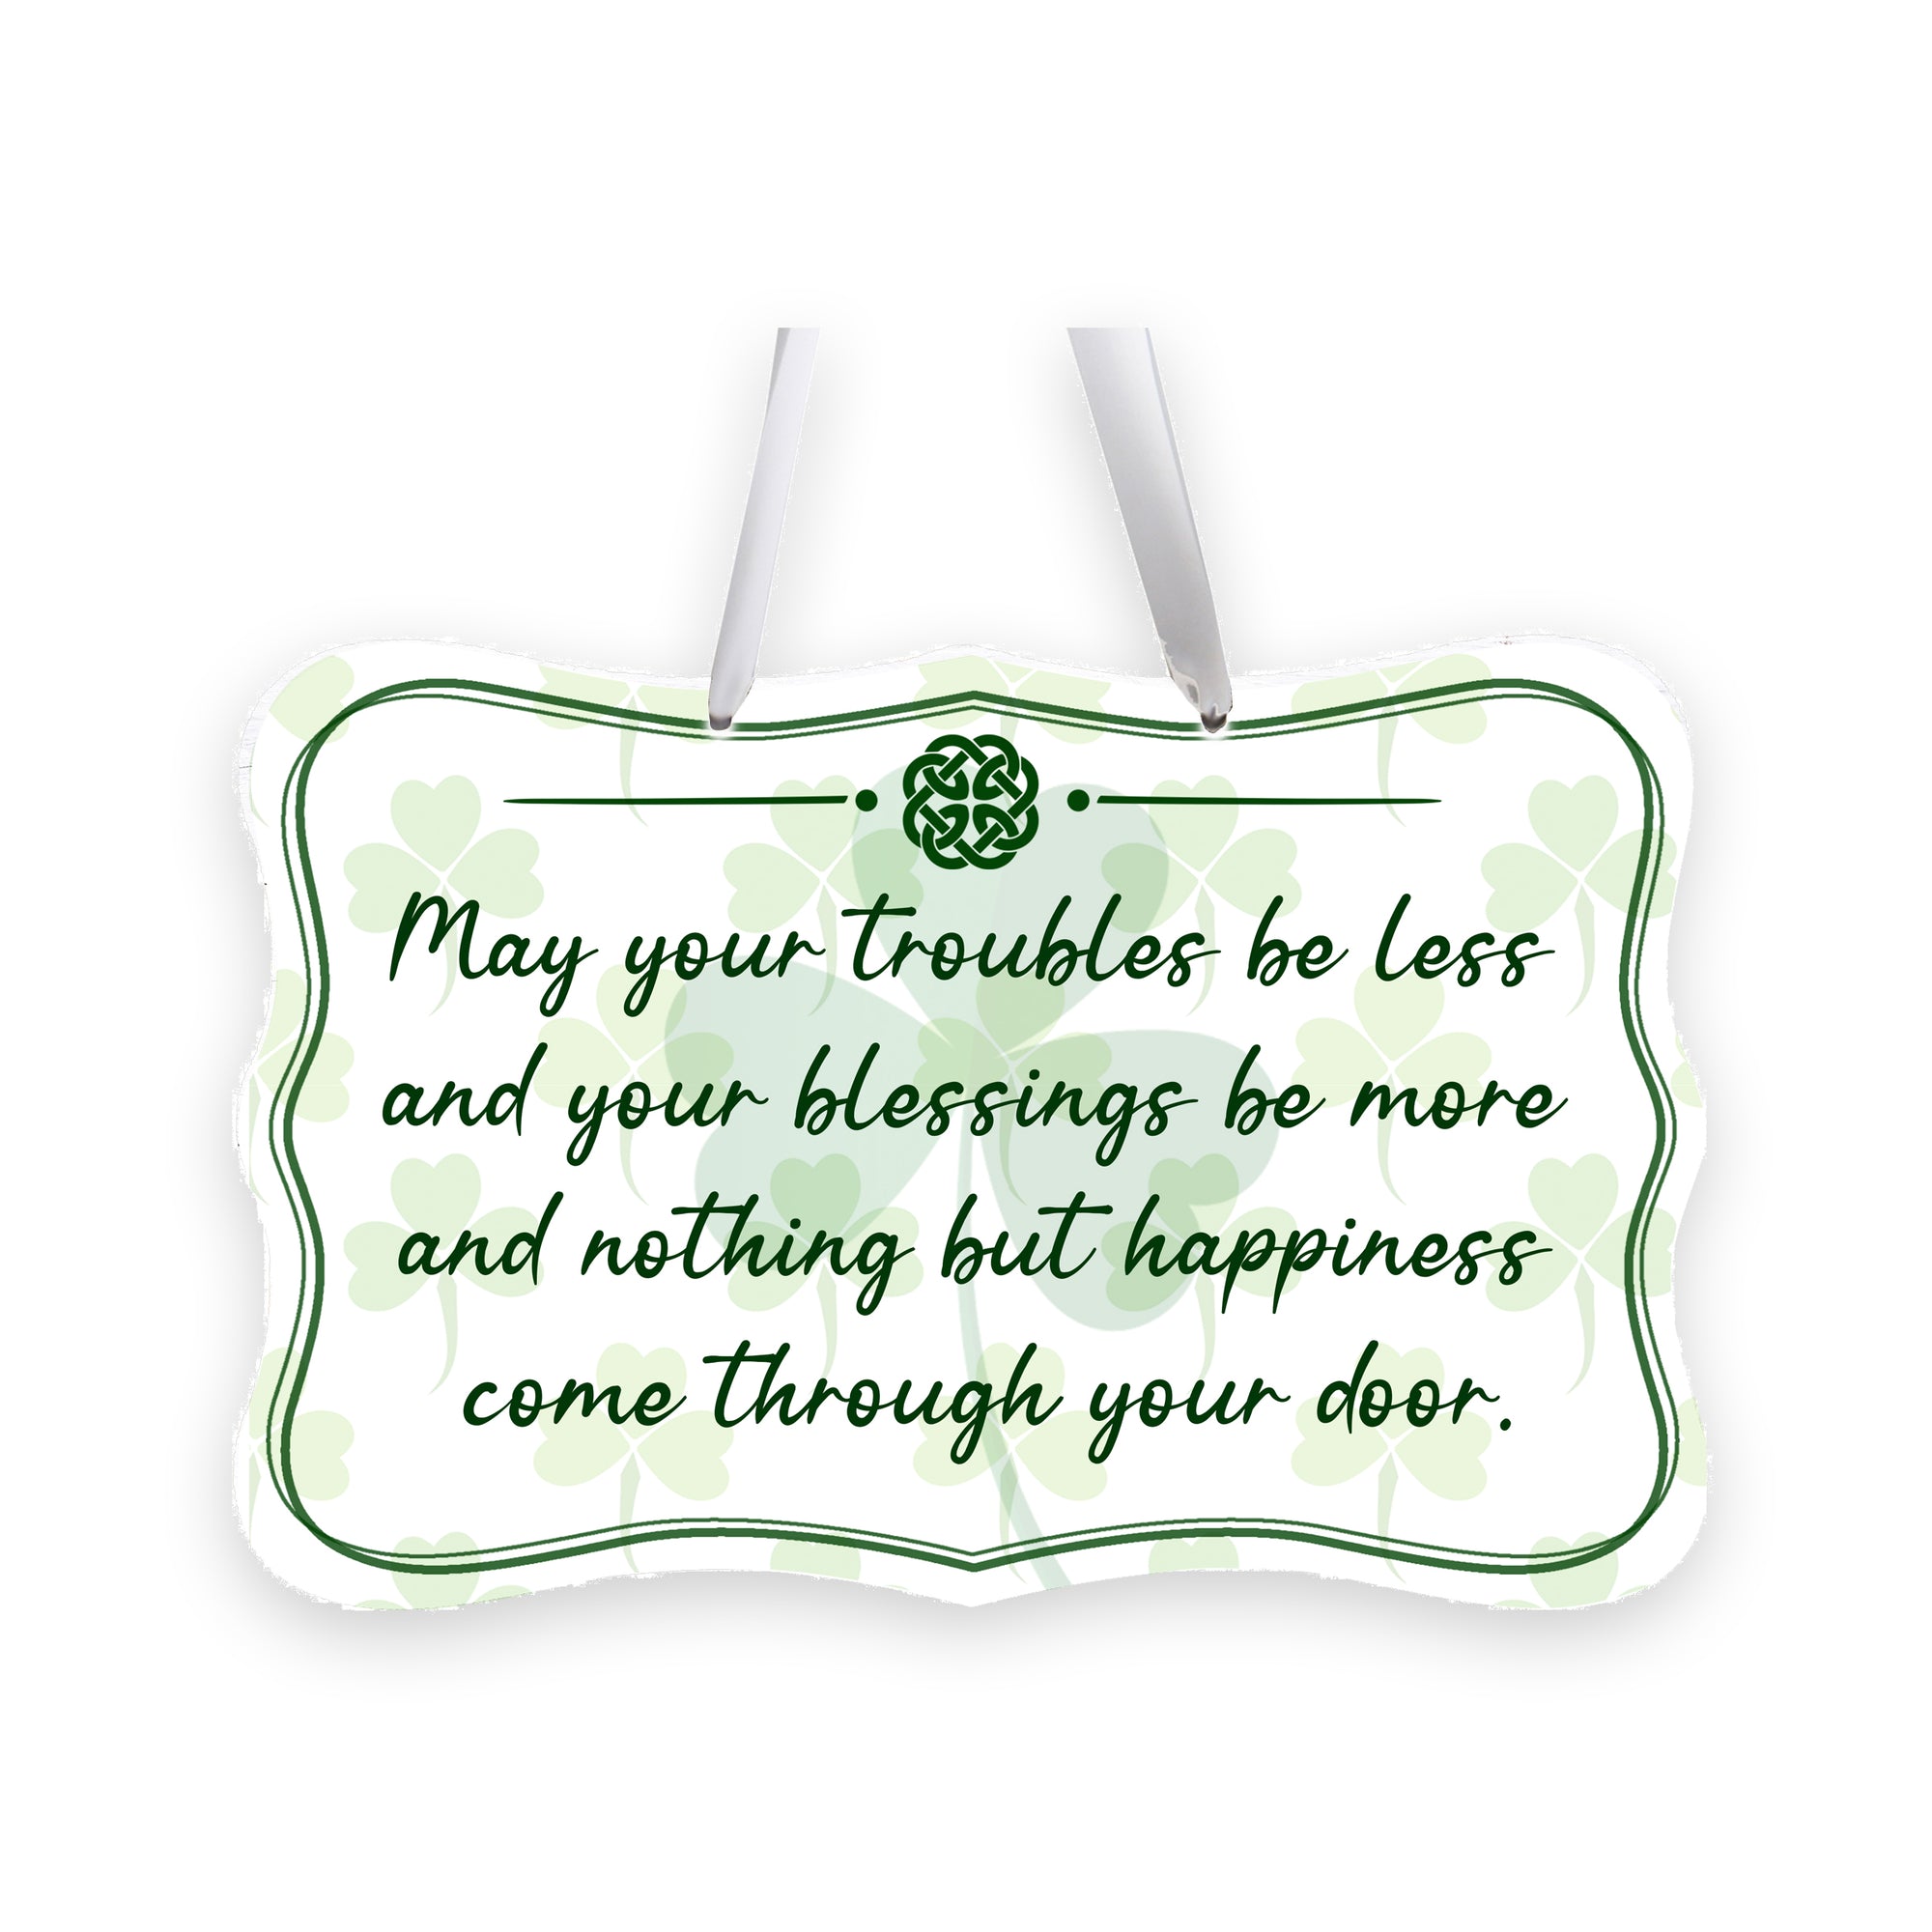 St. Patrick’s Day Irish Everyday Ribbon Wall Sign 8x12 - May Your Troubles Be Less